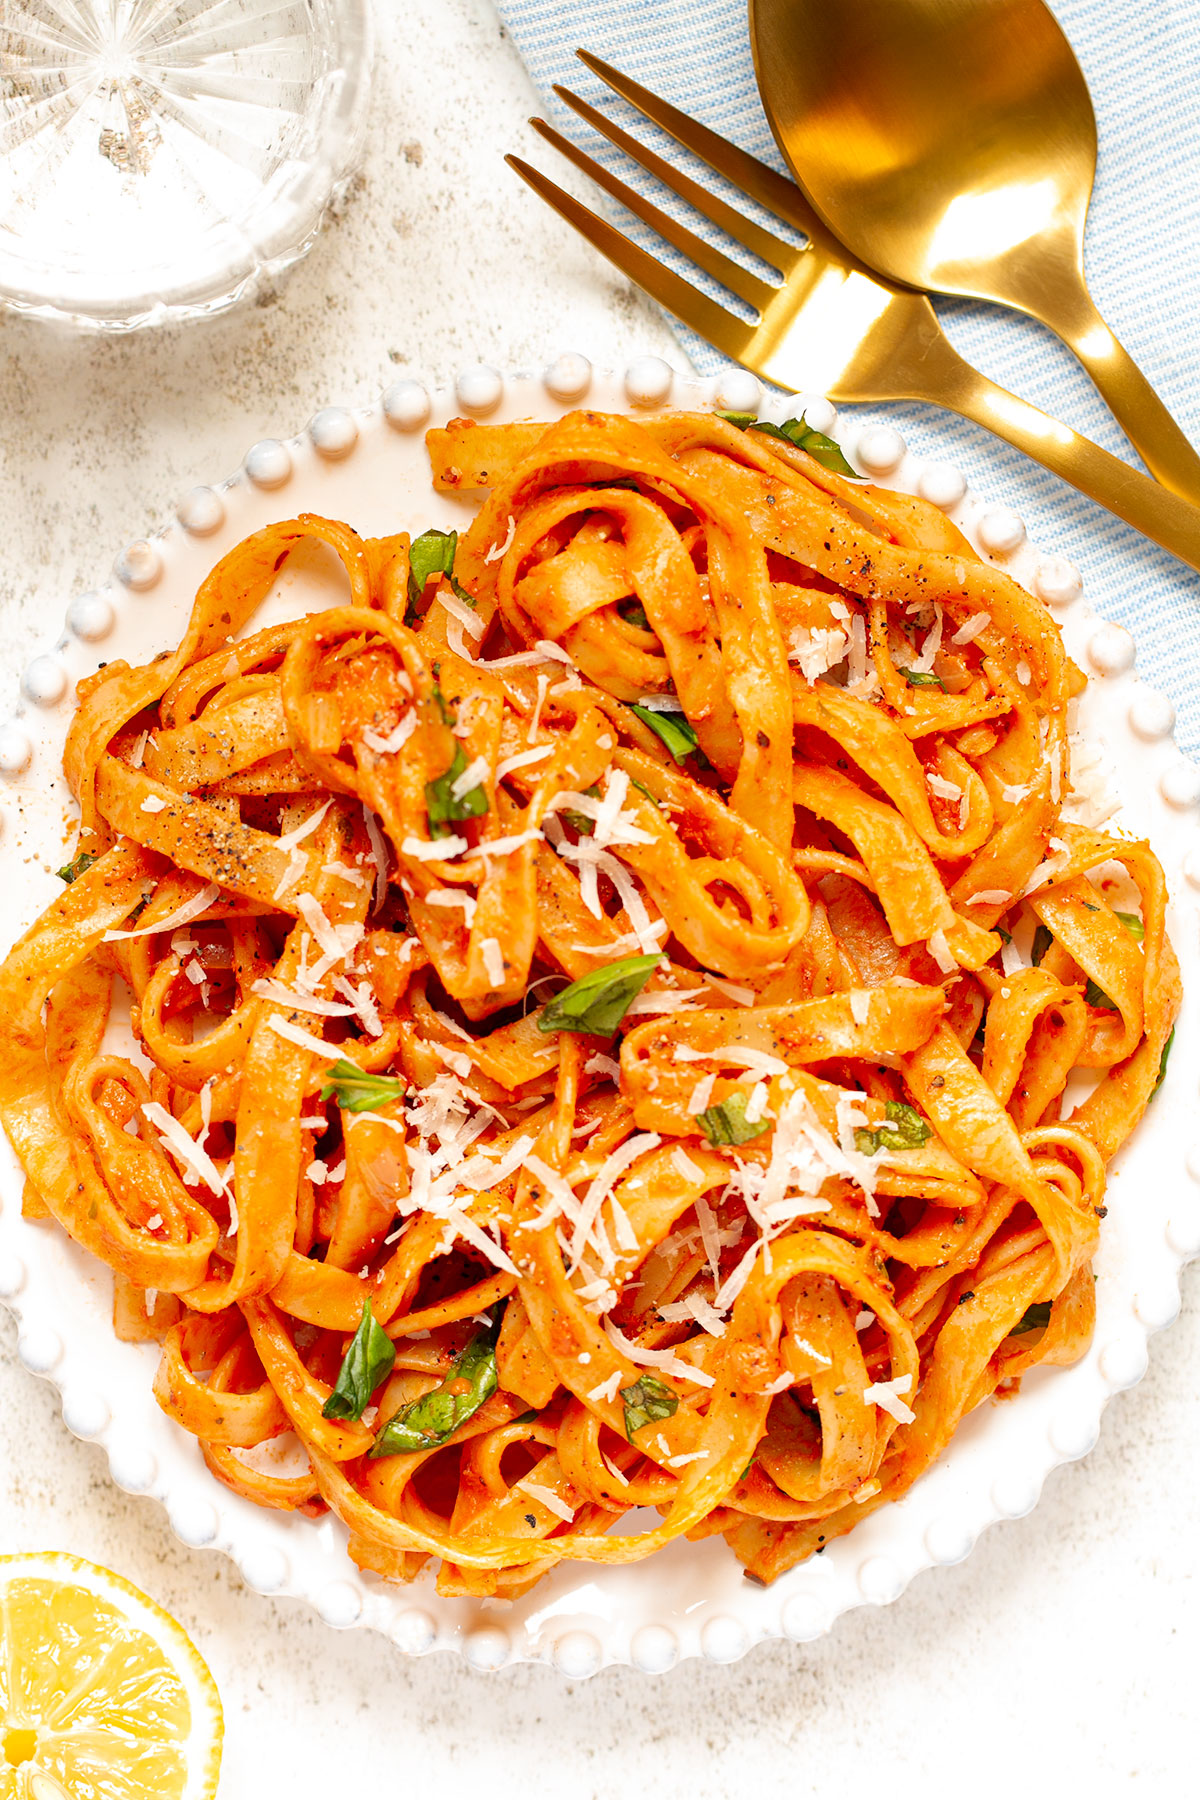 A bowl of Mascarpone Tomato Pasta on a white background with cutlery and a side of half a lemon.